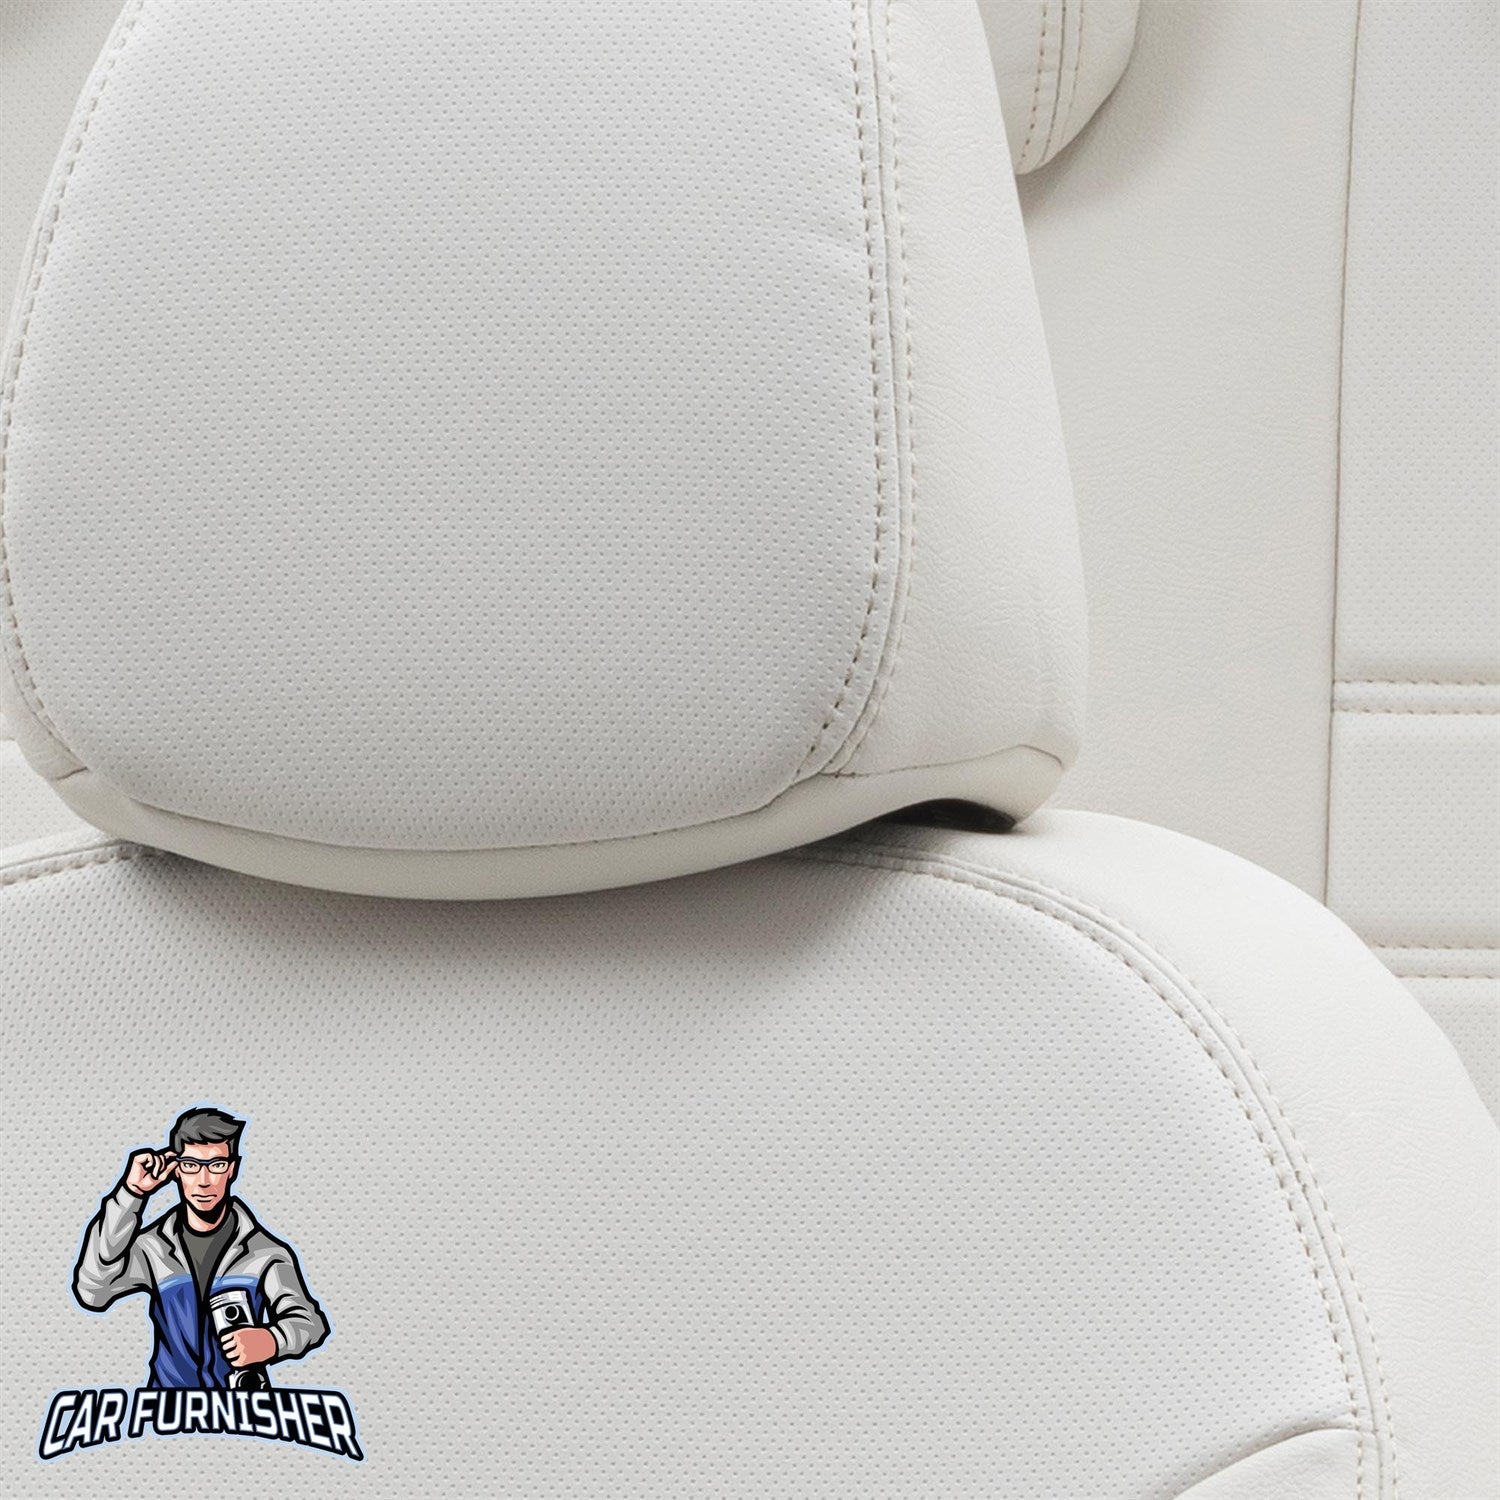 Mitsubishi Outlander Car Seat Covers 2012-2023 Istanbul Design Ivory Leather & Fabric